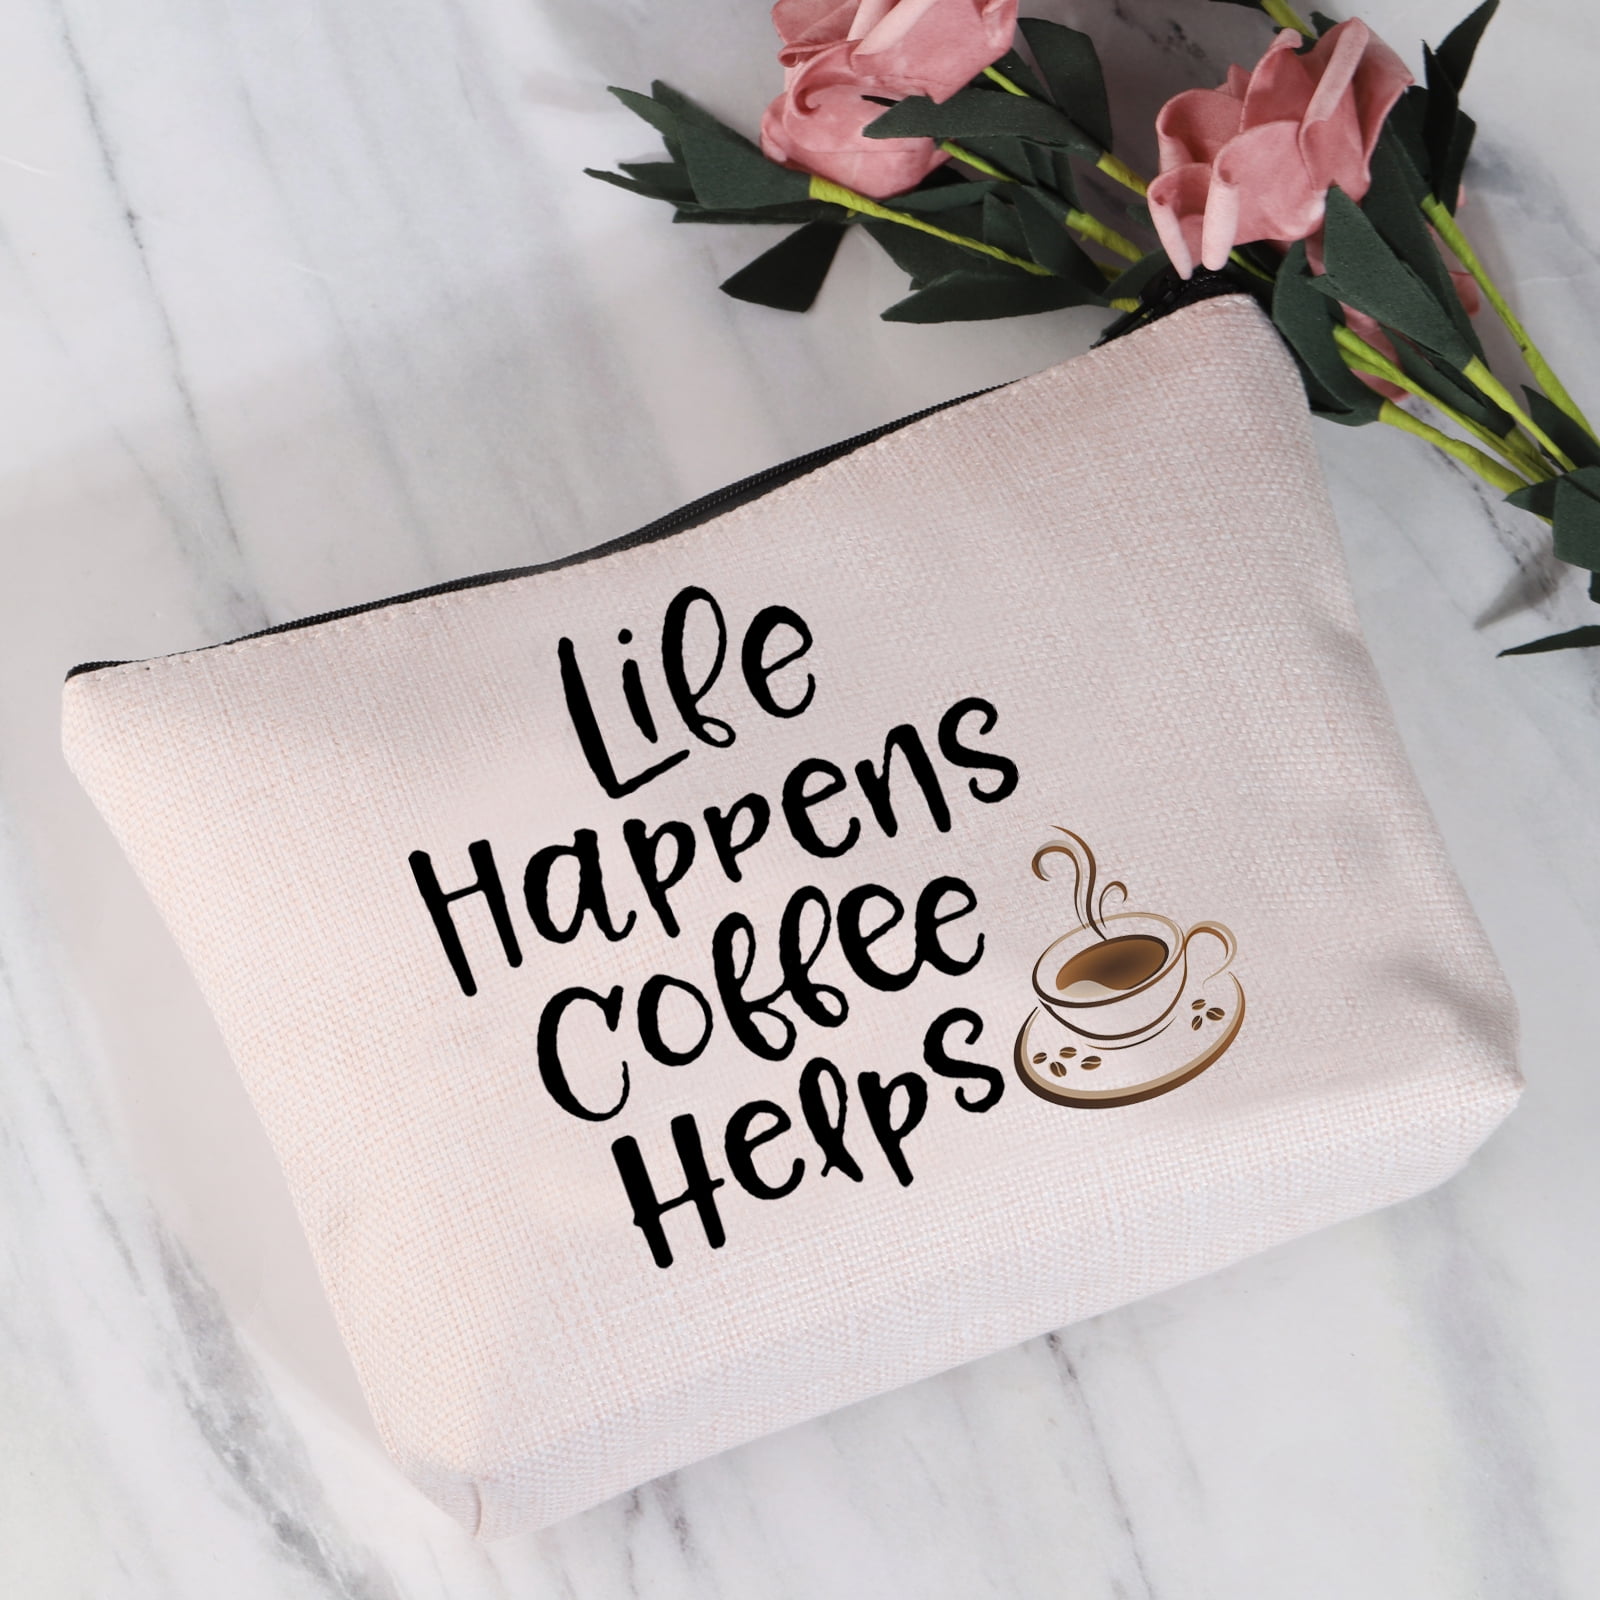 FEELMEM Coffee Lover Gifts Life Happens Coffee Helps Makeup Bag Coffee Friends Gifts Barista Gifts Coffee Themed Cosmetic Bag Coffee Reading Book Lover Gifts